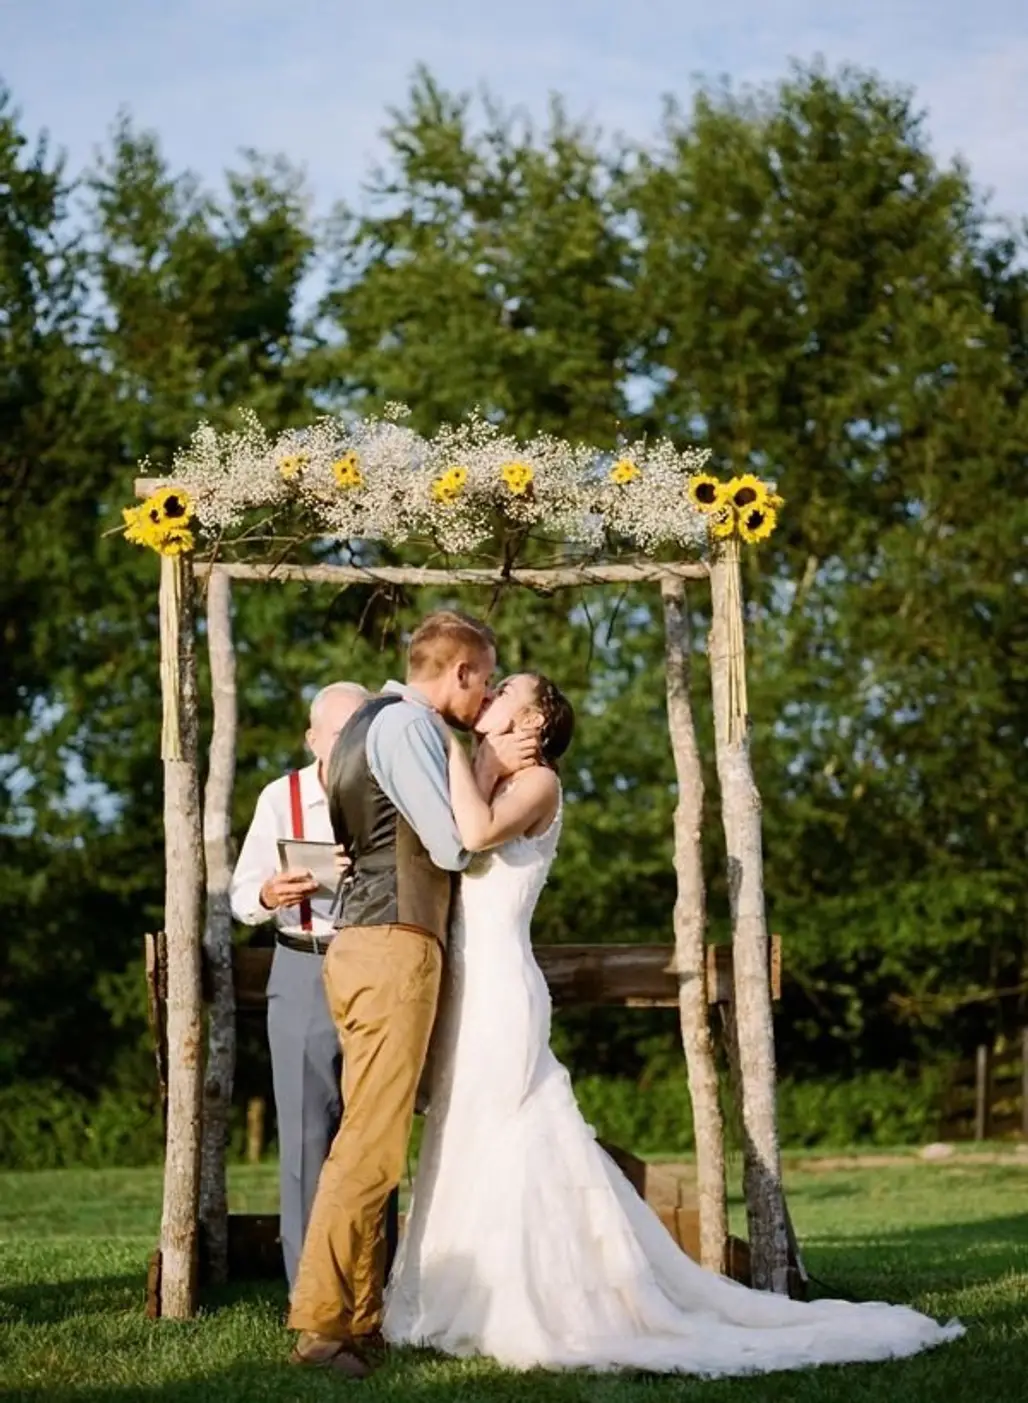 DIY Arbor with Sunflowers and Baby’s Breath